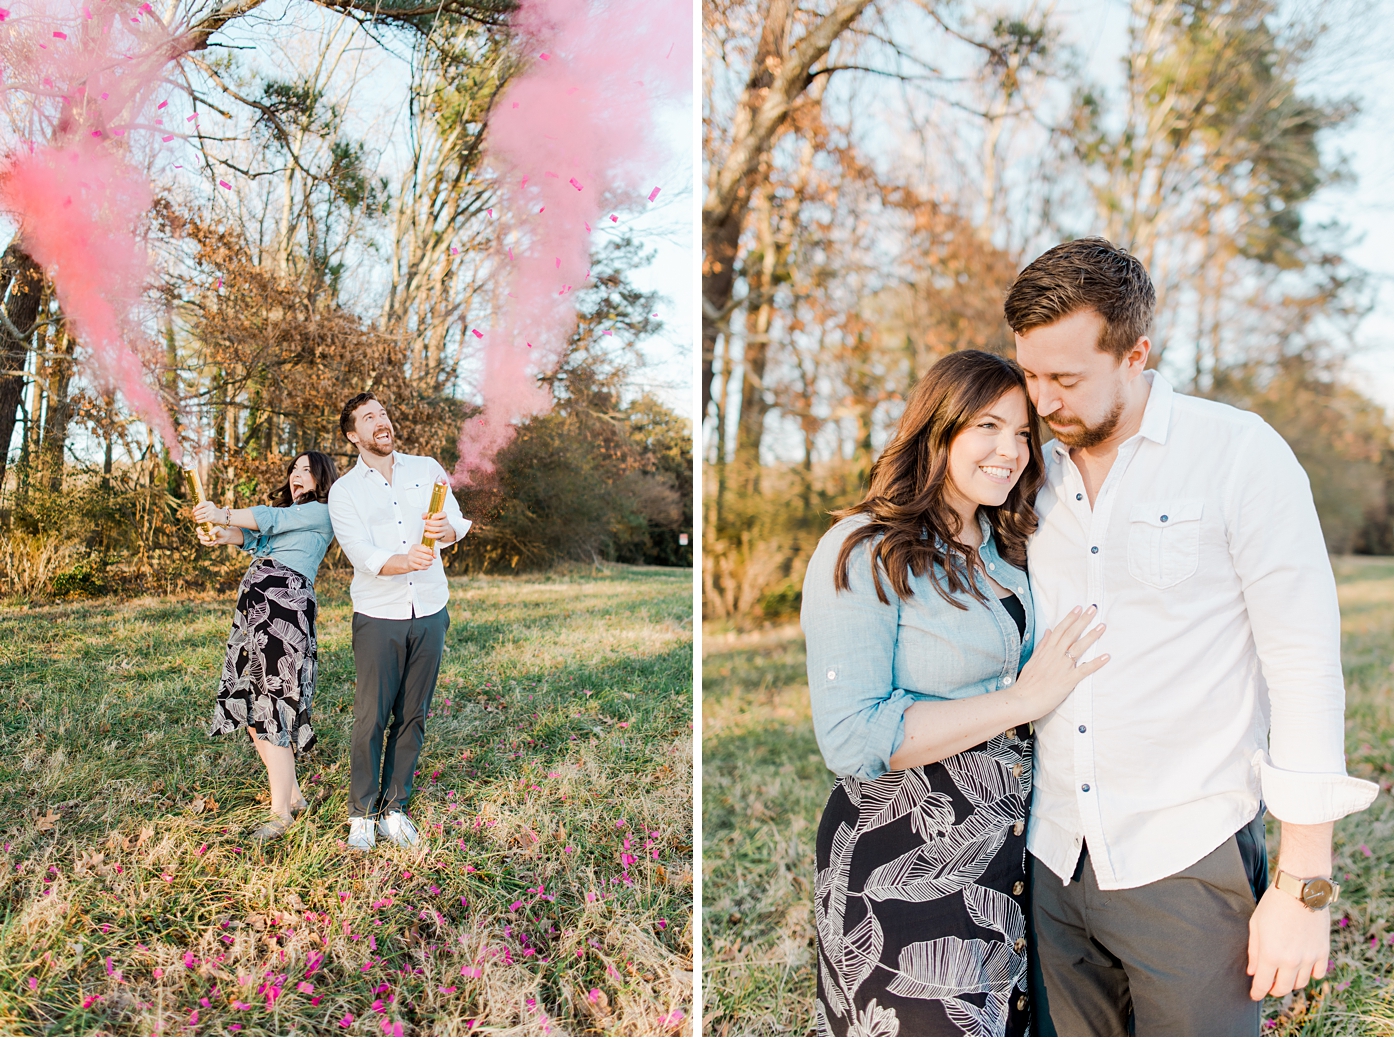 Baby Girl Gender Reveal Photos with Smoke Confetti Bomb